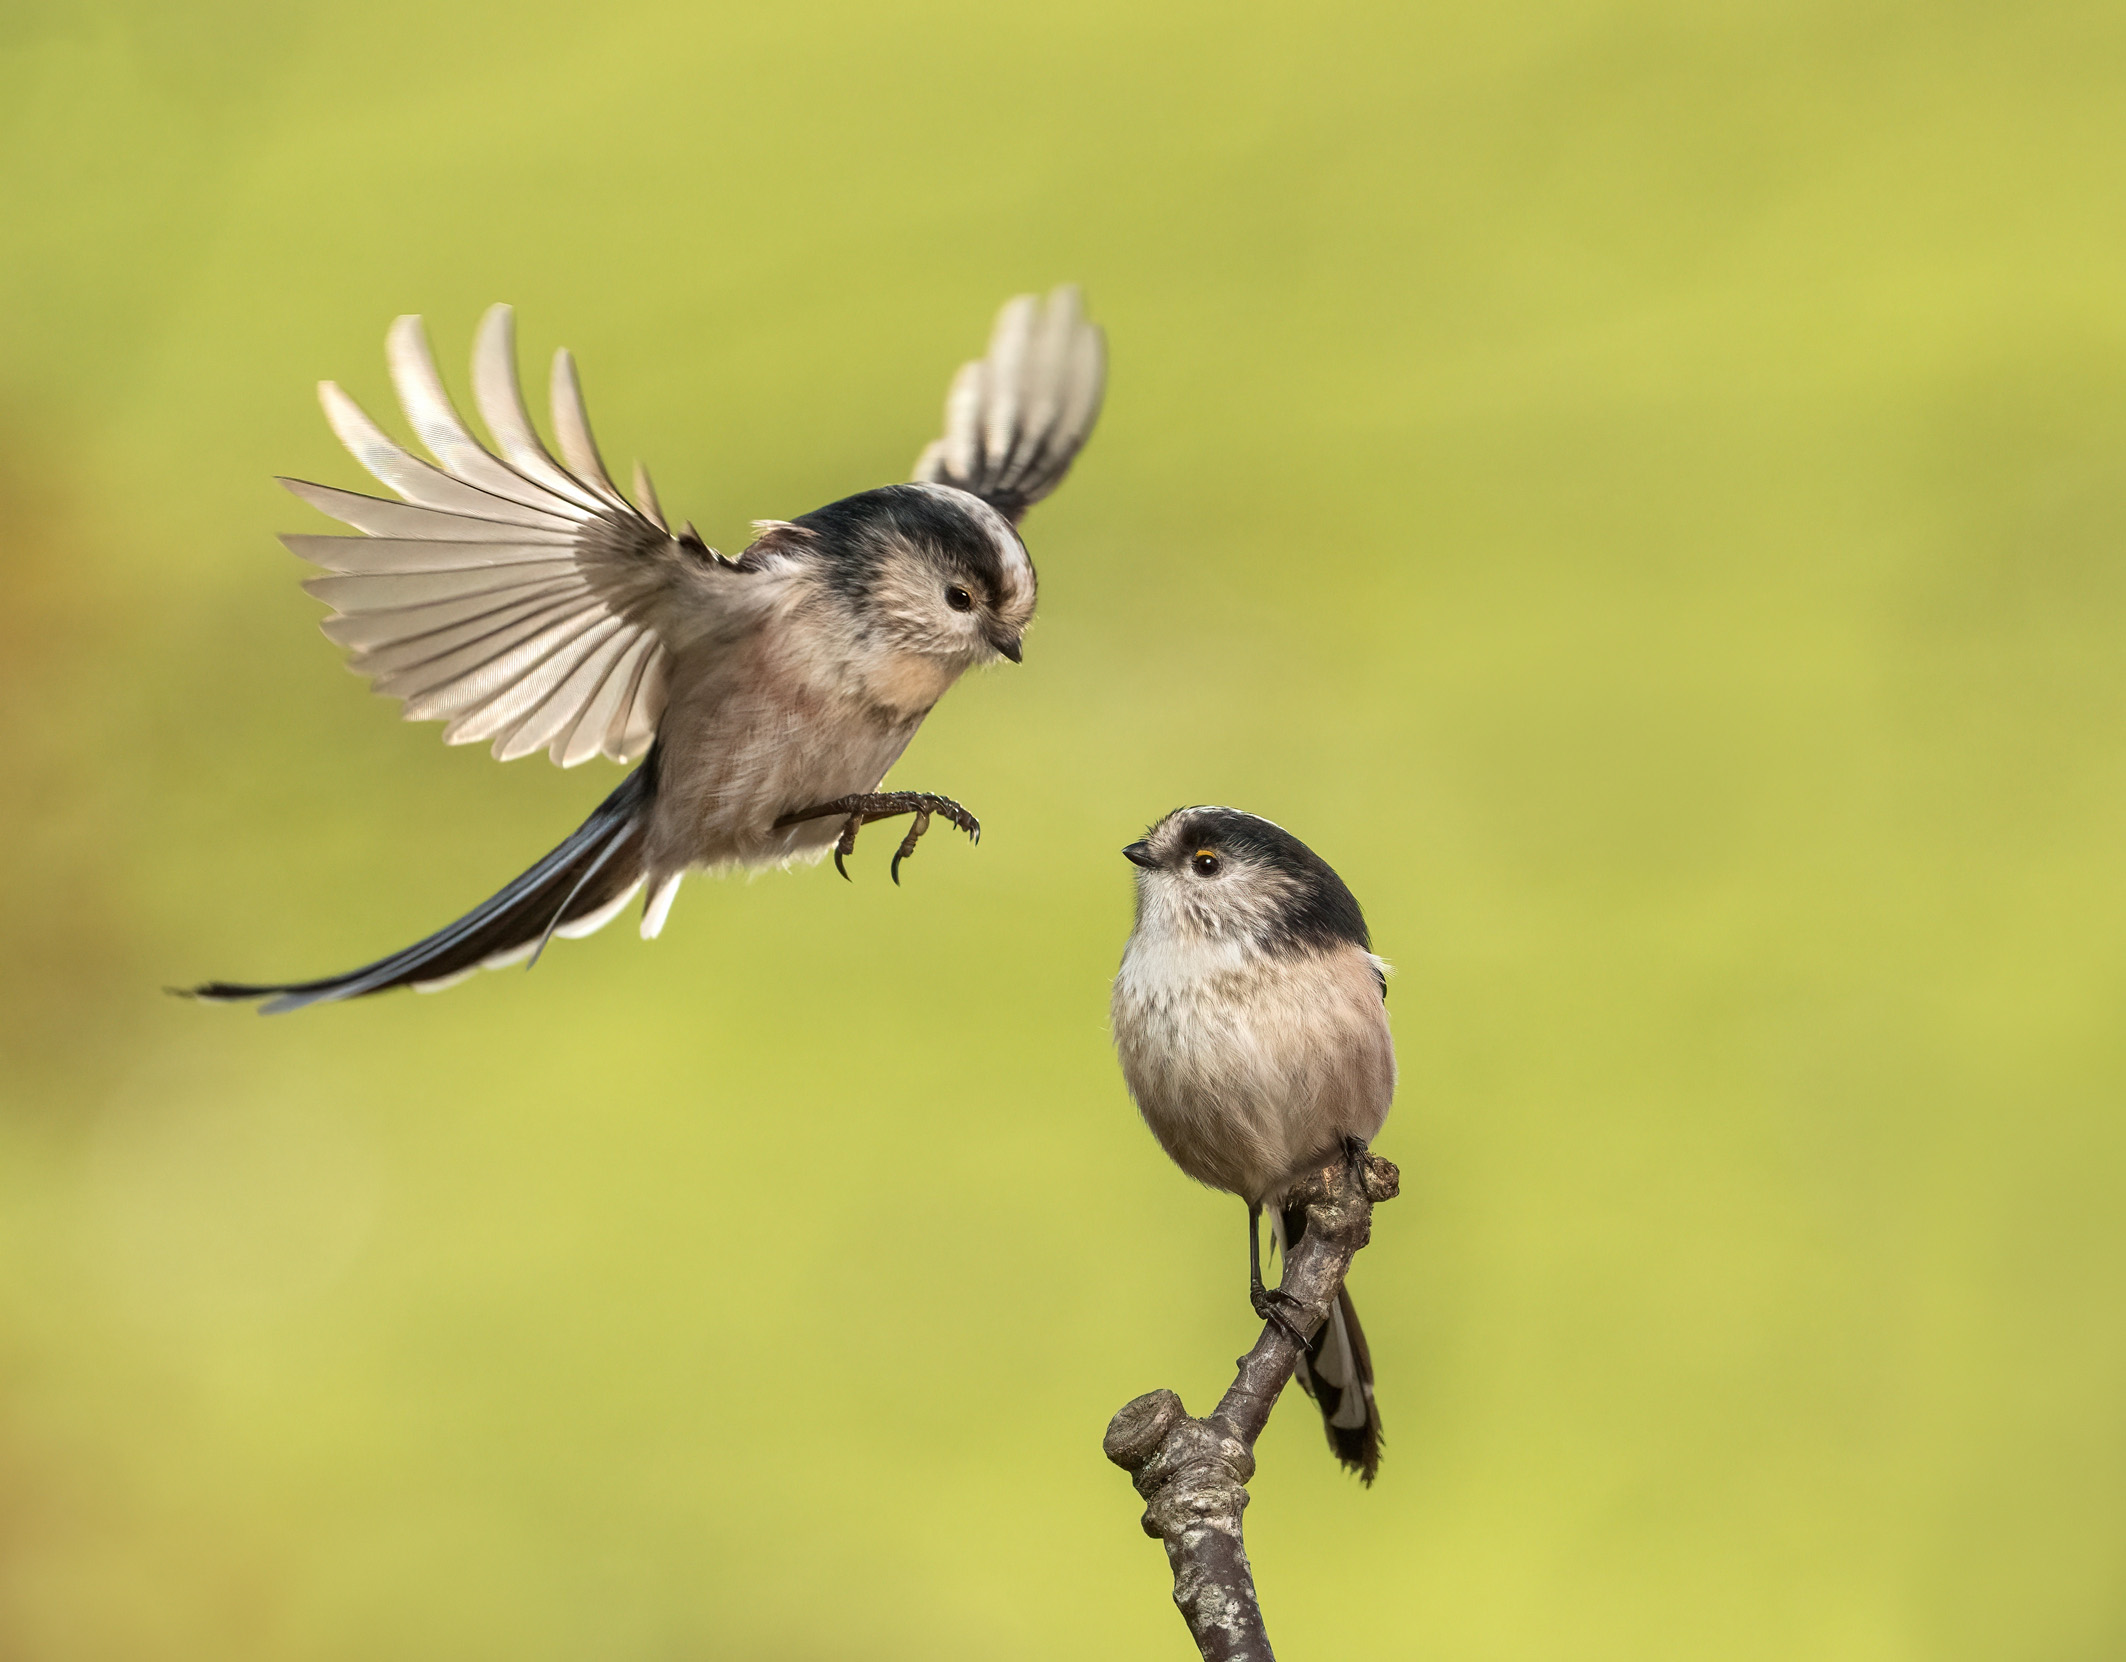 A pair of Long-tailed Tits, one perched on a twig and the other in flight, about to land.